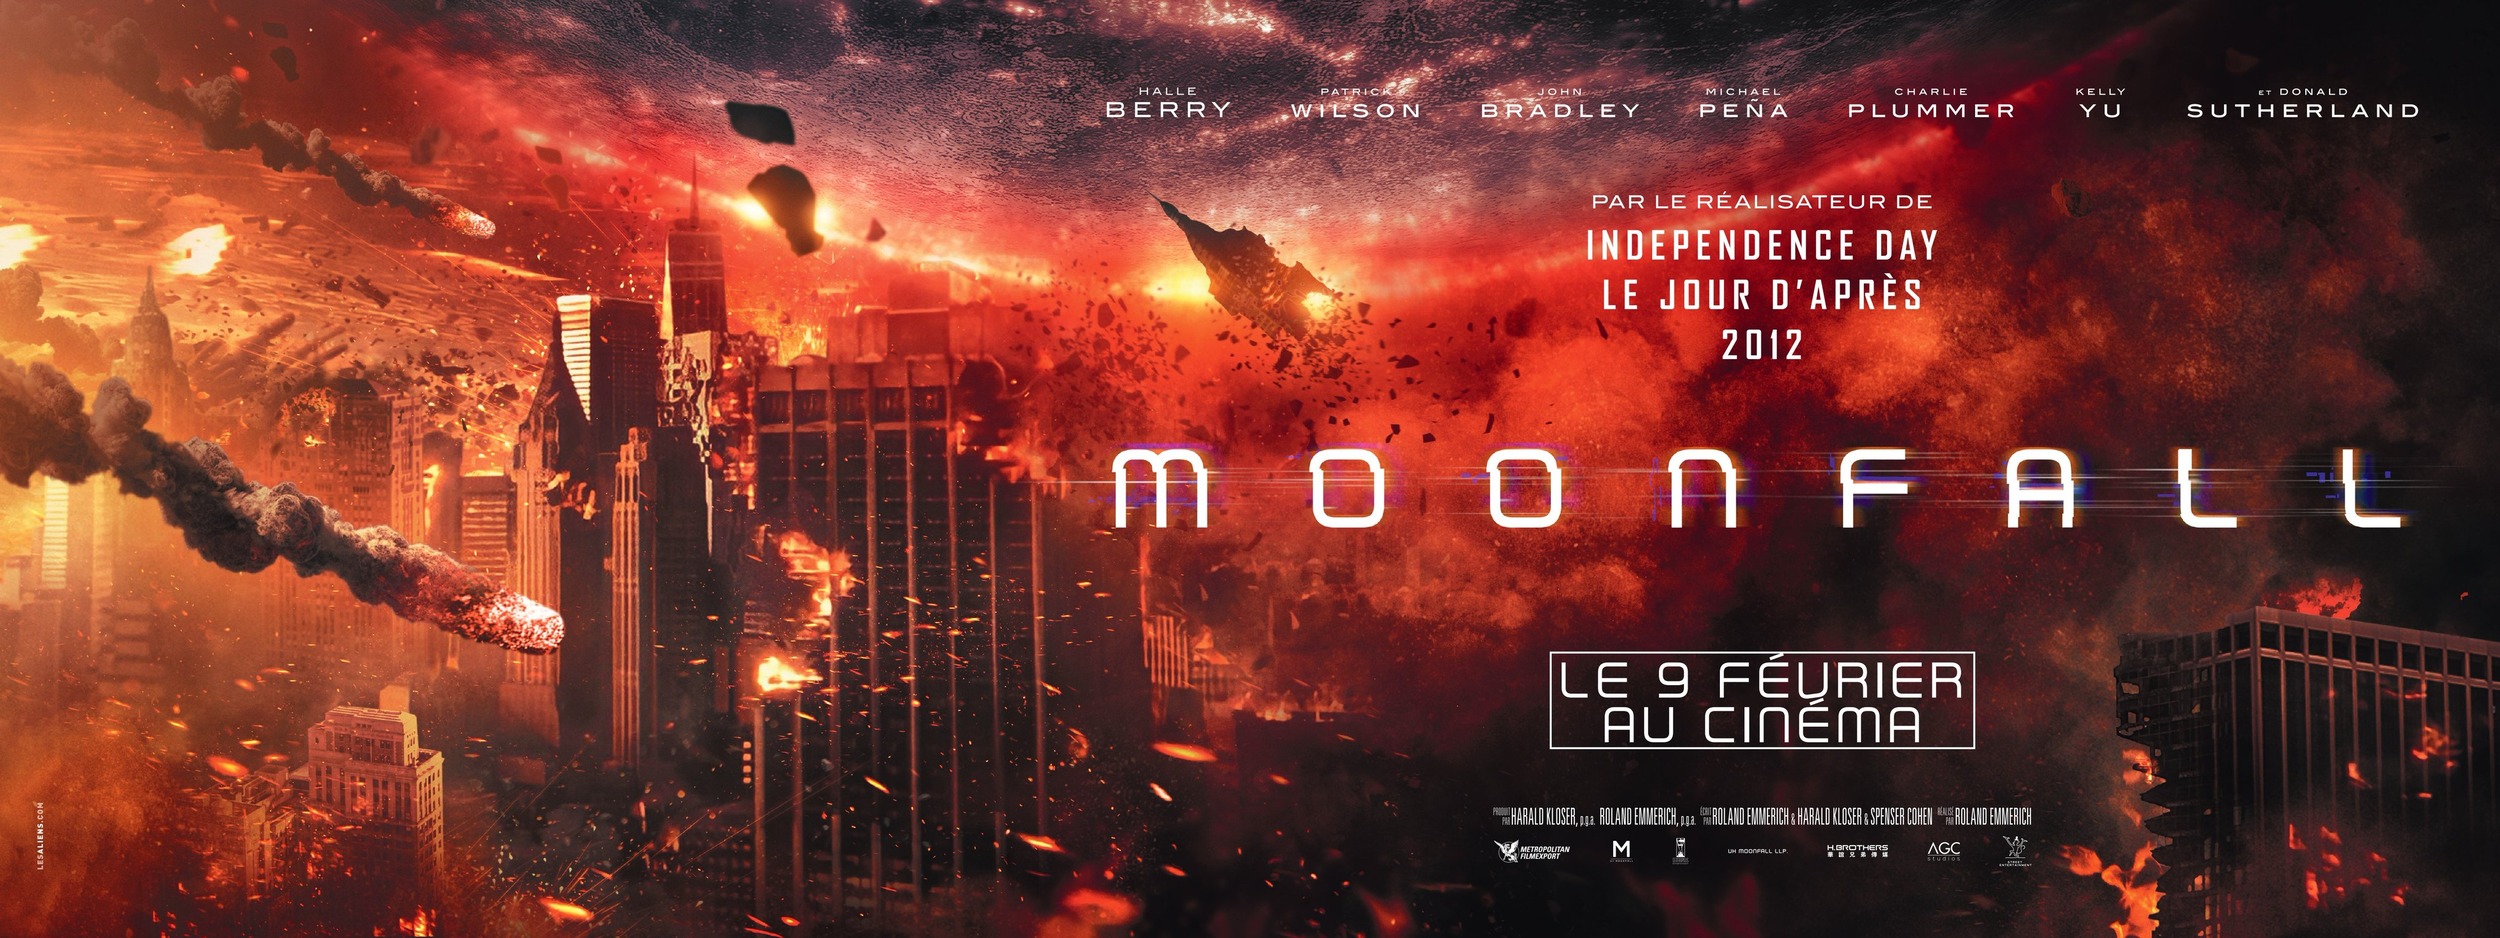 Moonfall 2022 Movie Wallpapers